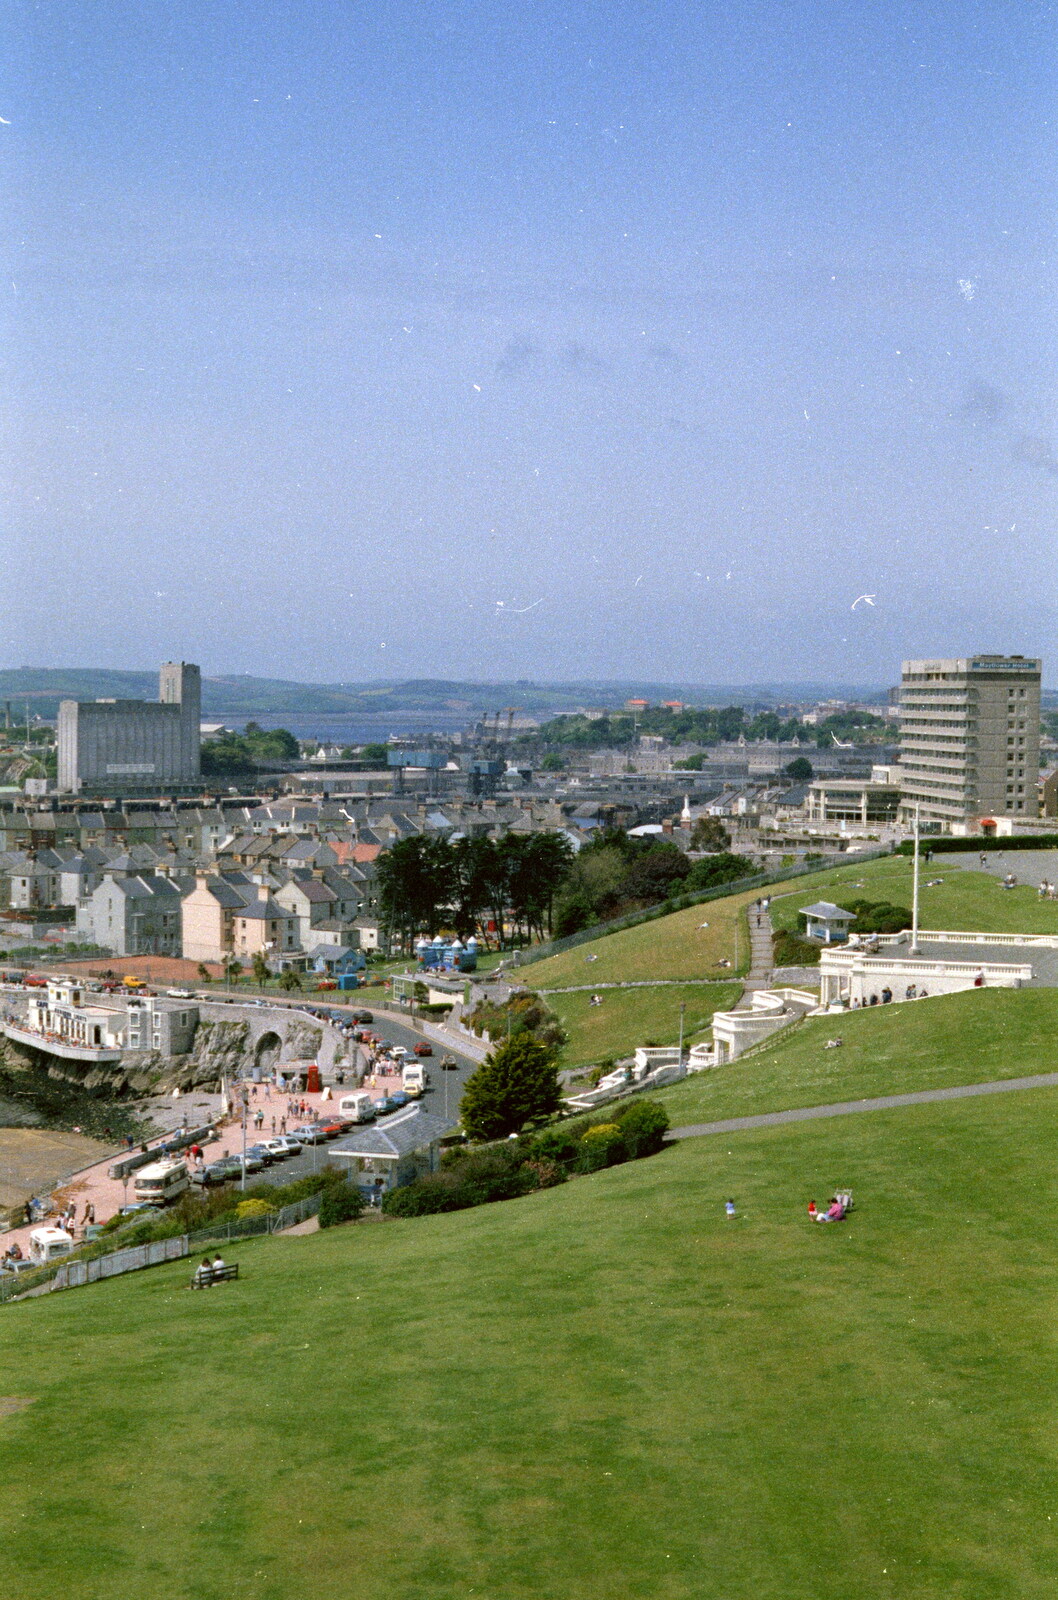 West Hoe and Devonport from Uni: A Plymouth Hoe Panorama, Plymouth, Devon - 7th May 1986